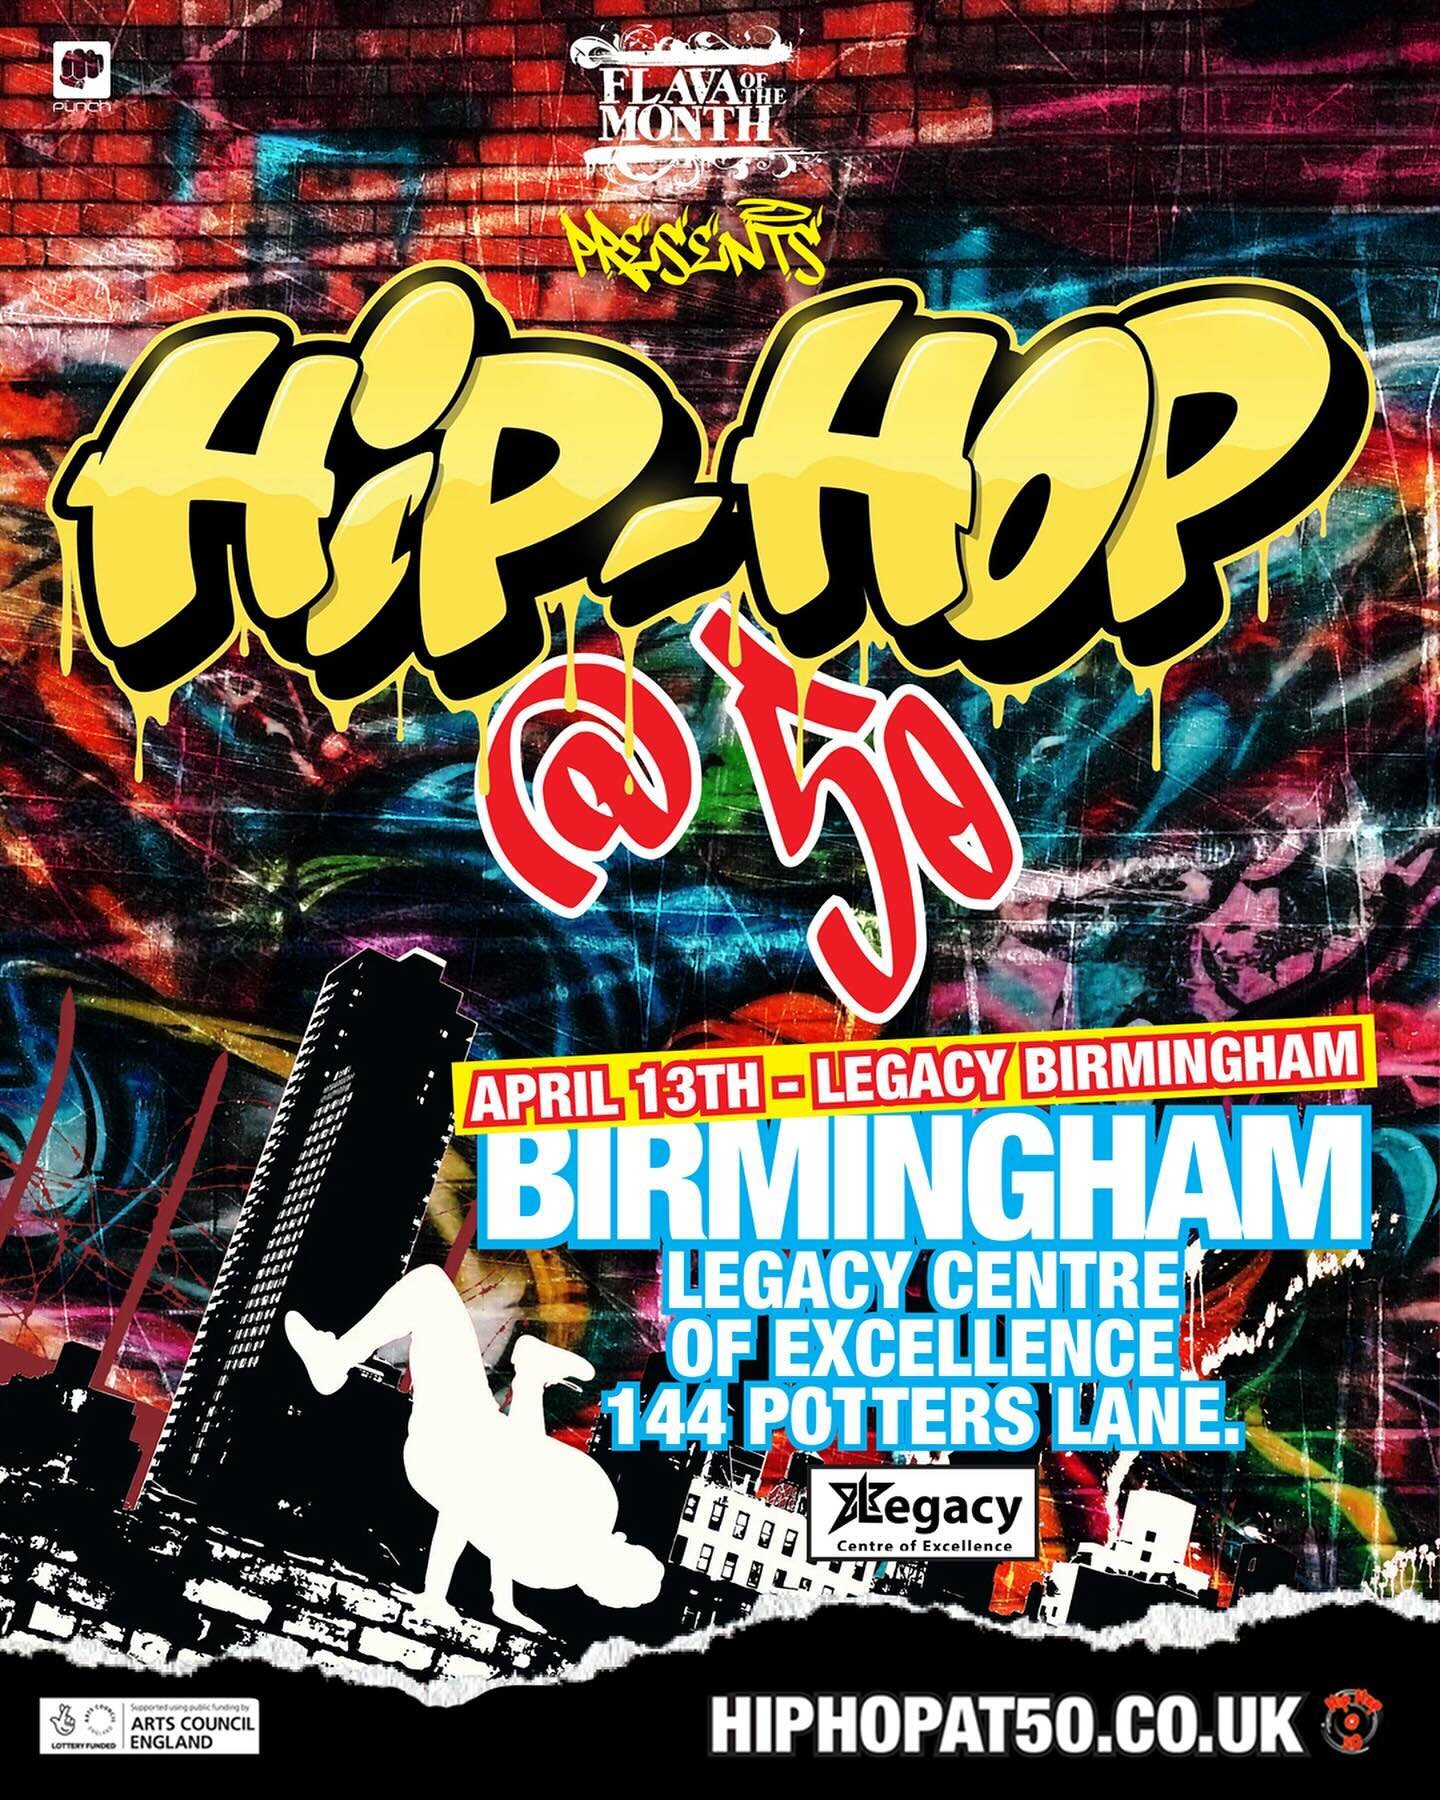 Hip Hop @ 50 5 day UK Tour

We will be touching down in these cities for one exclusive day
🔹 Birmingham
🔹 London 
🔹 Leicester 
🔹 Manchester 
🔹 Bristol 

The day will include Acrylic Paint Parties, Hip Hop dance classes DJ workshops, Panel Discus